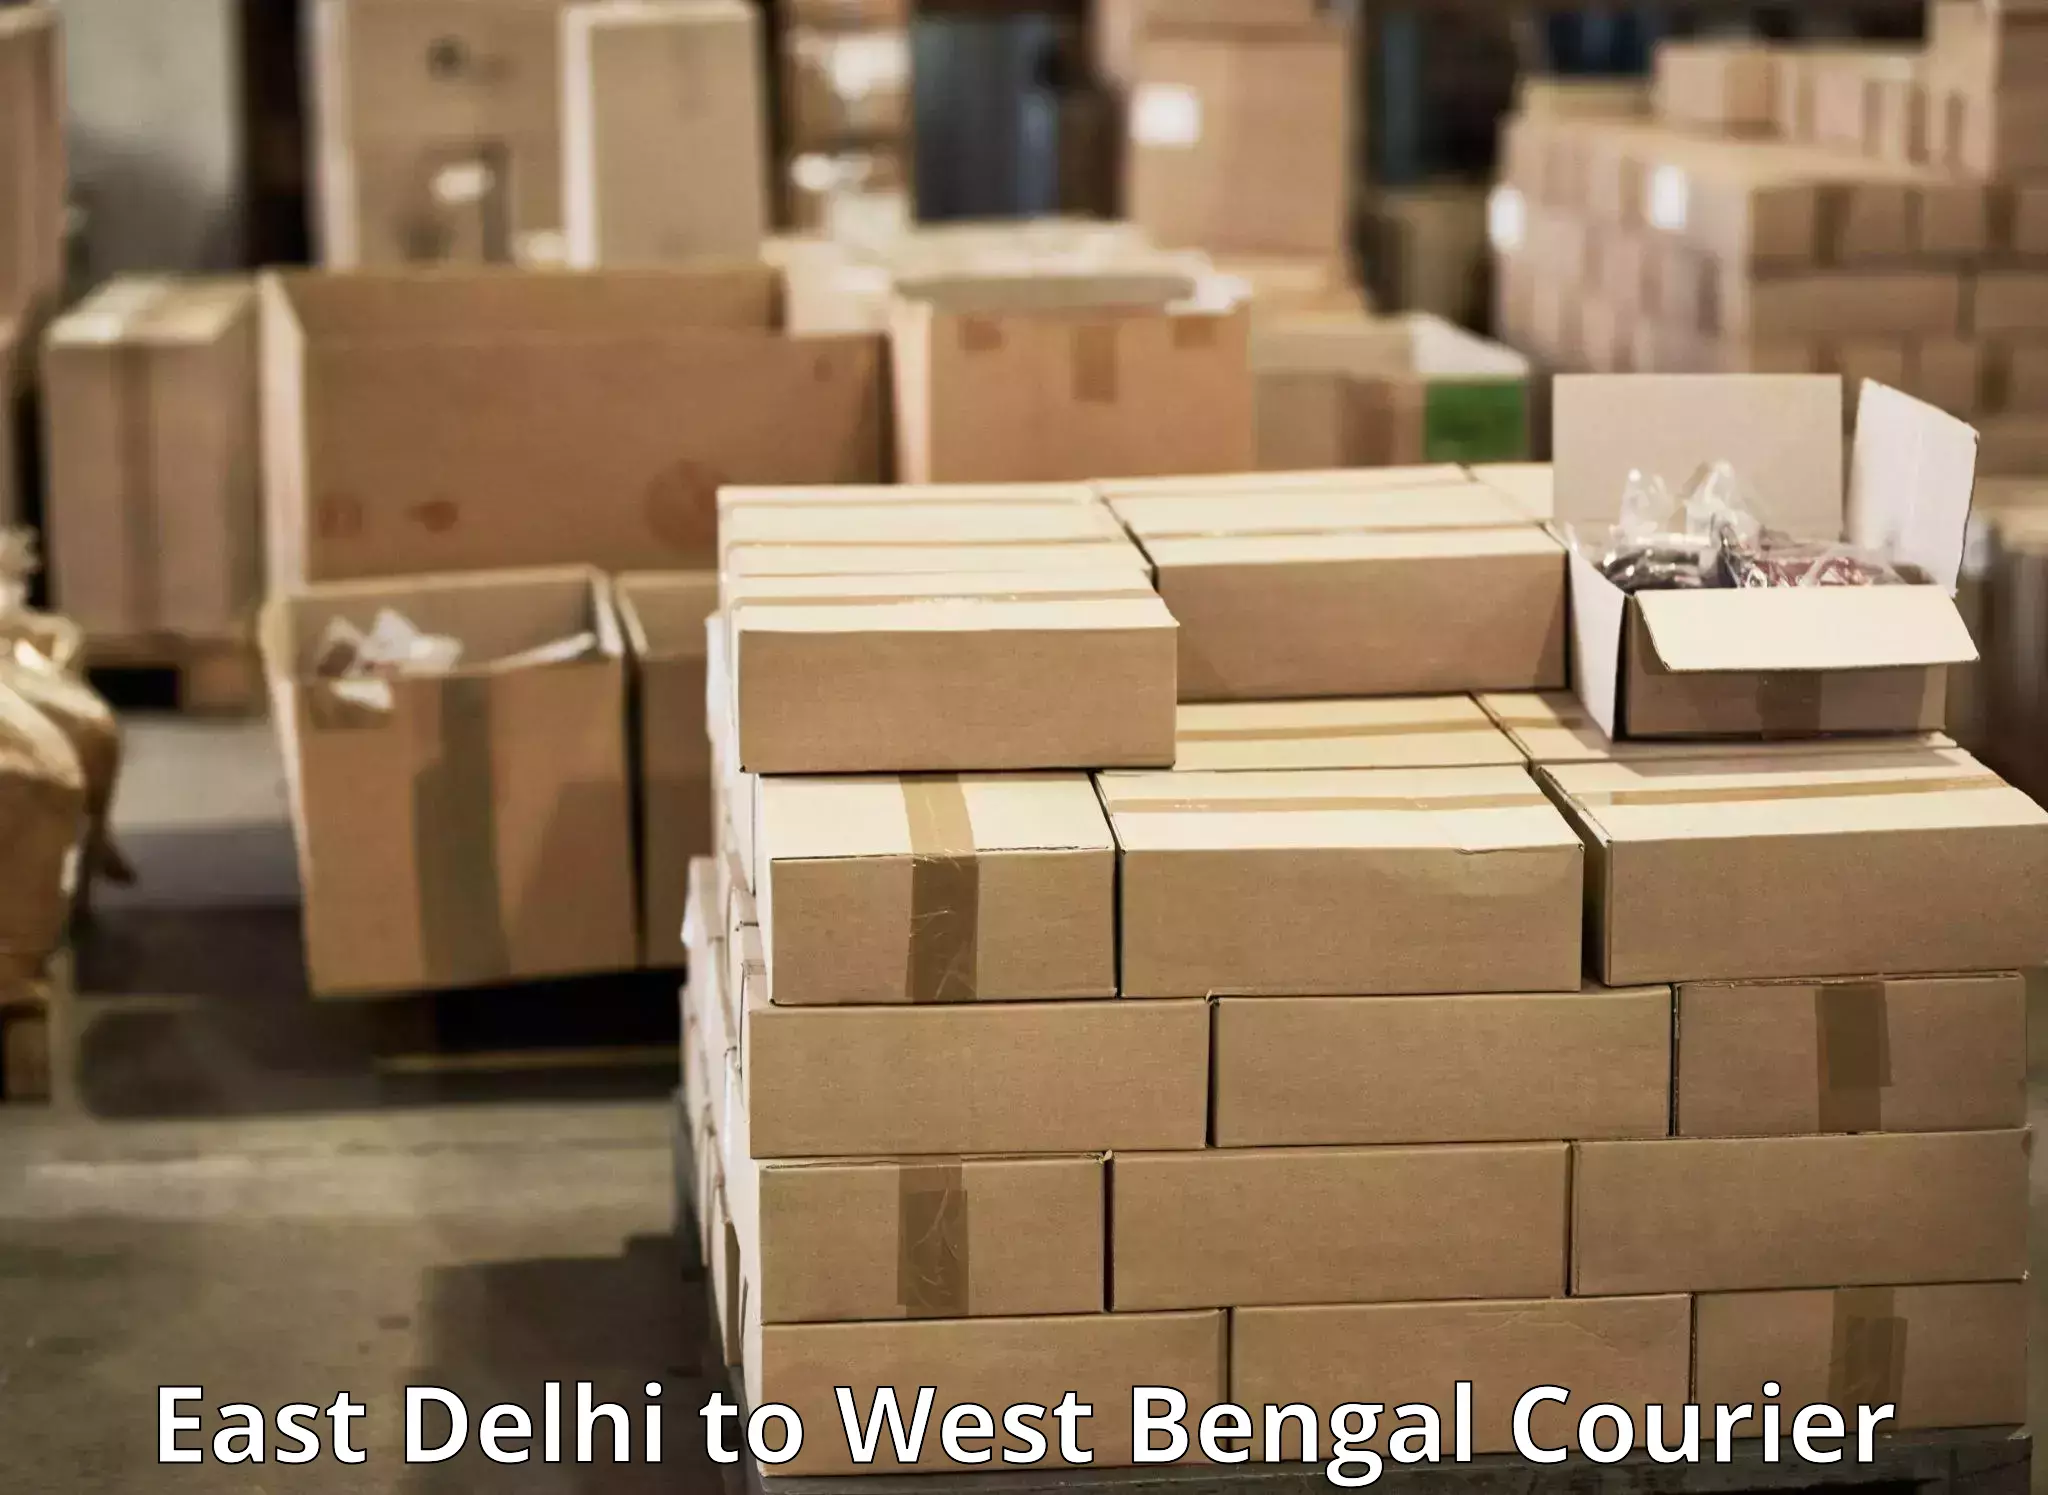 Expedited shipping methods in East Delhi to Manglamaro